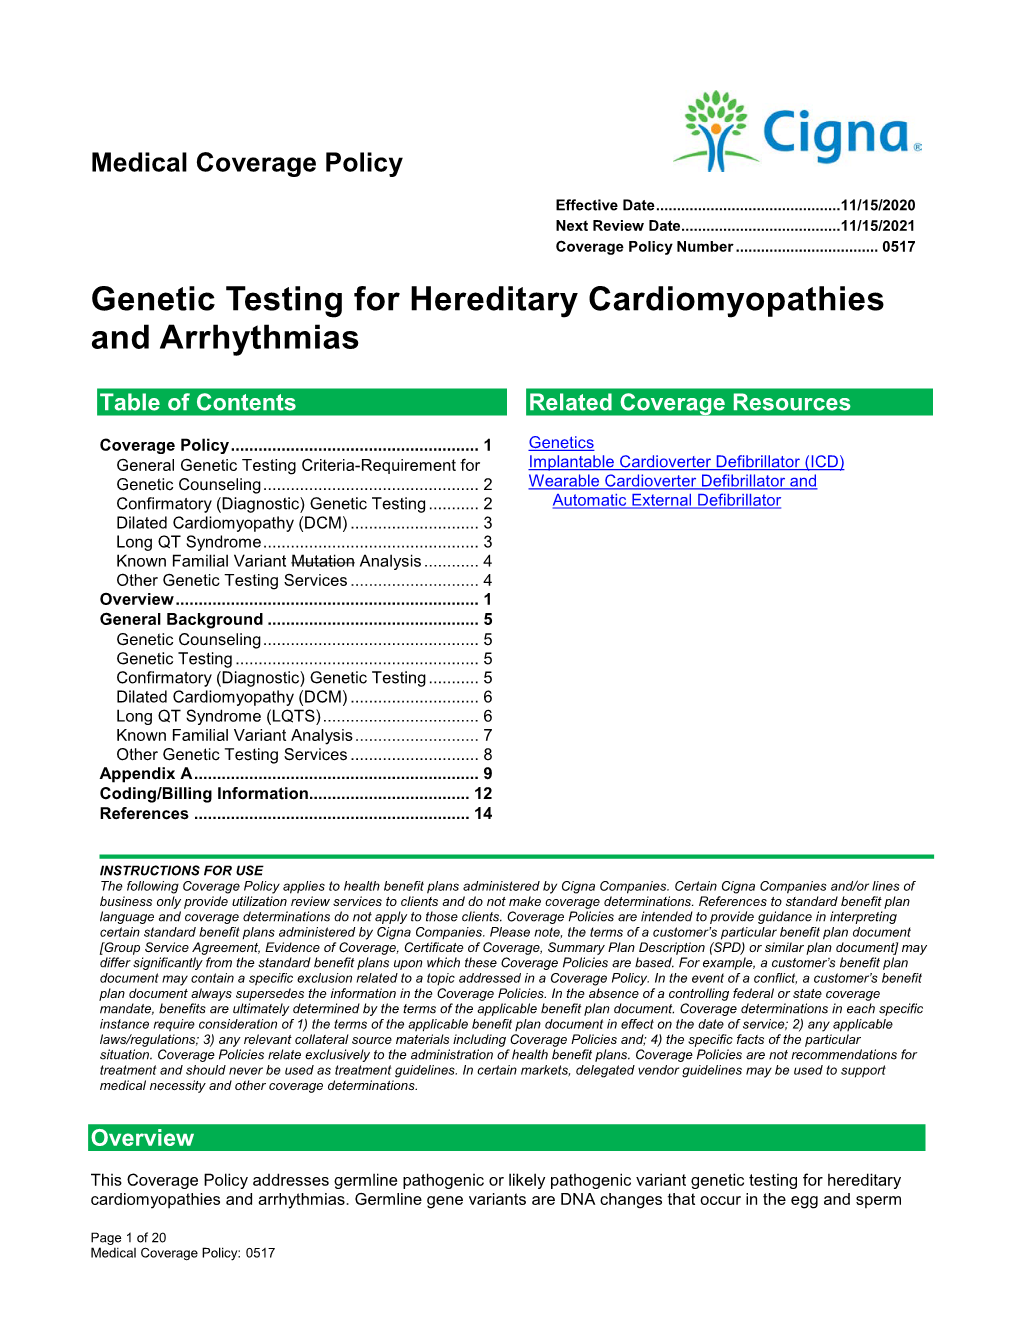 Genetic Testing for Hereditary Cardiomyopathies and Arrhythmias